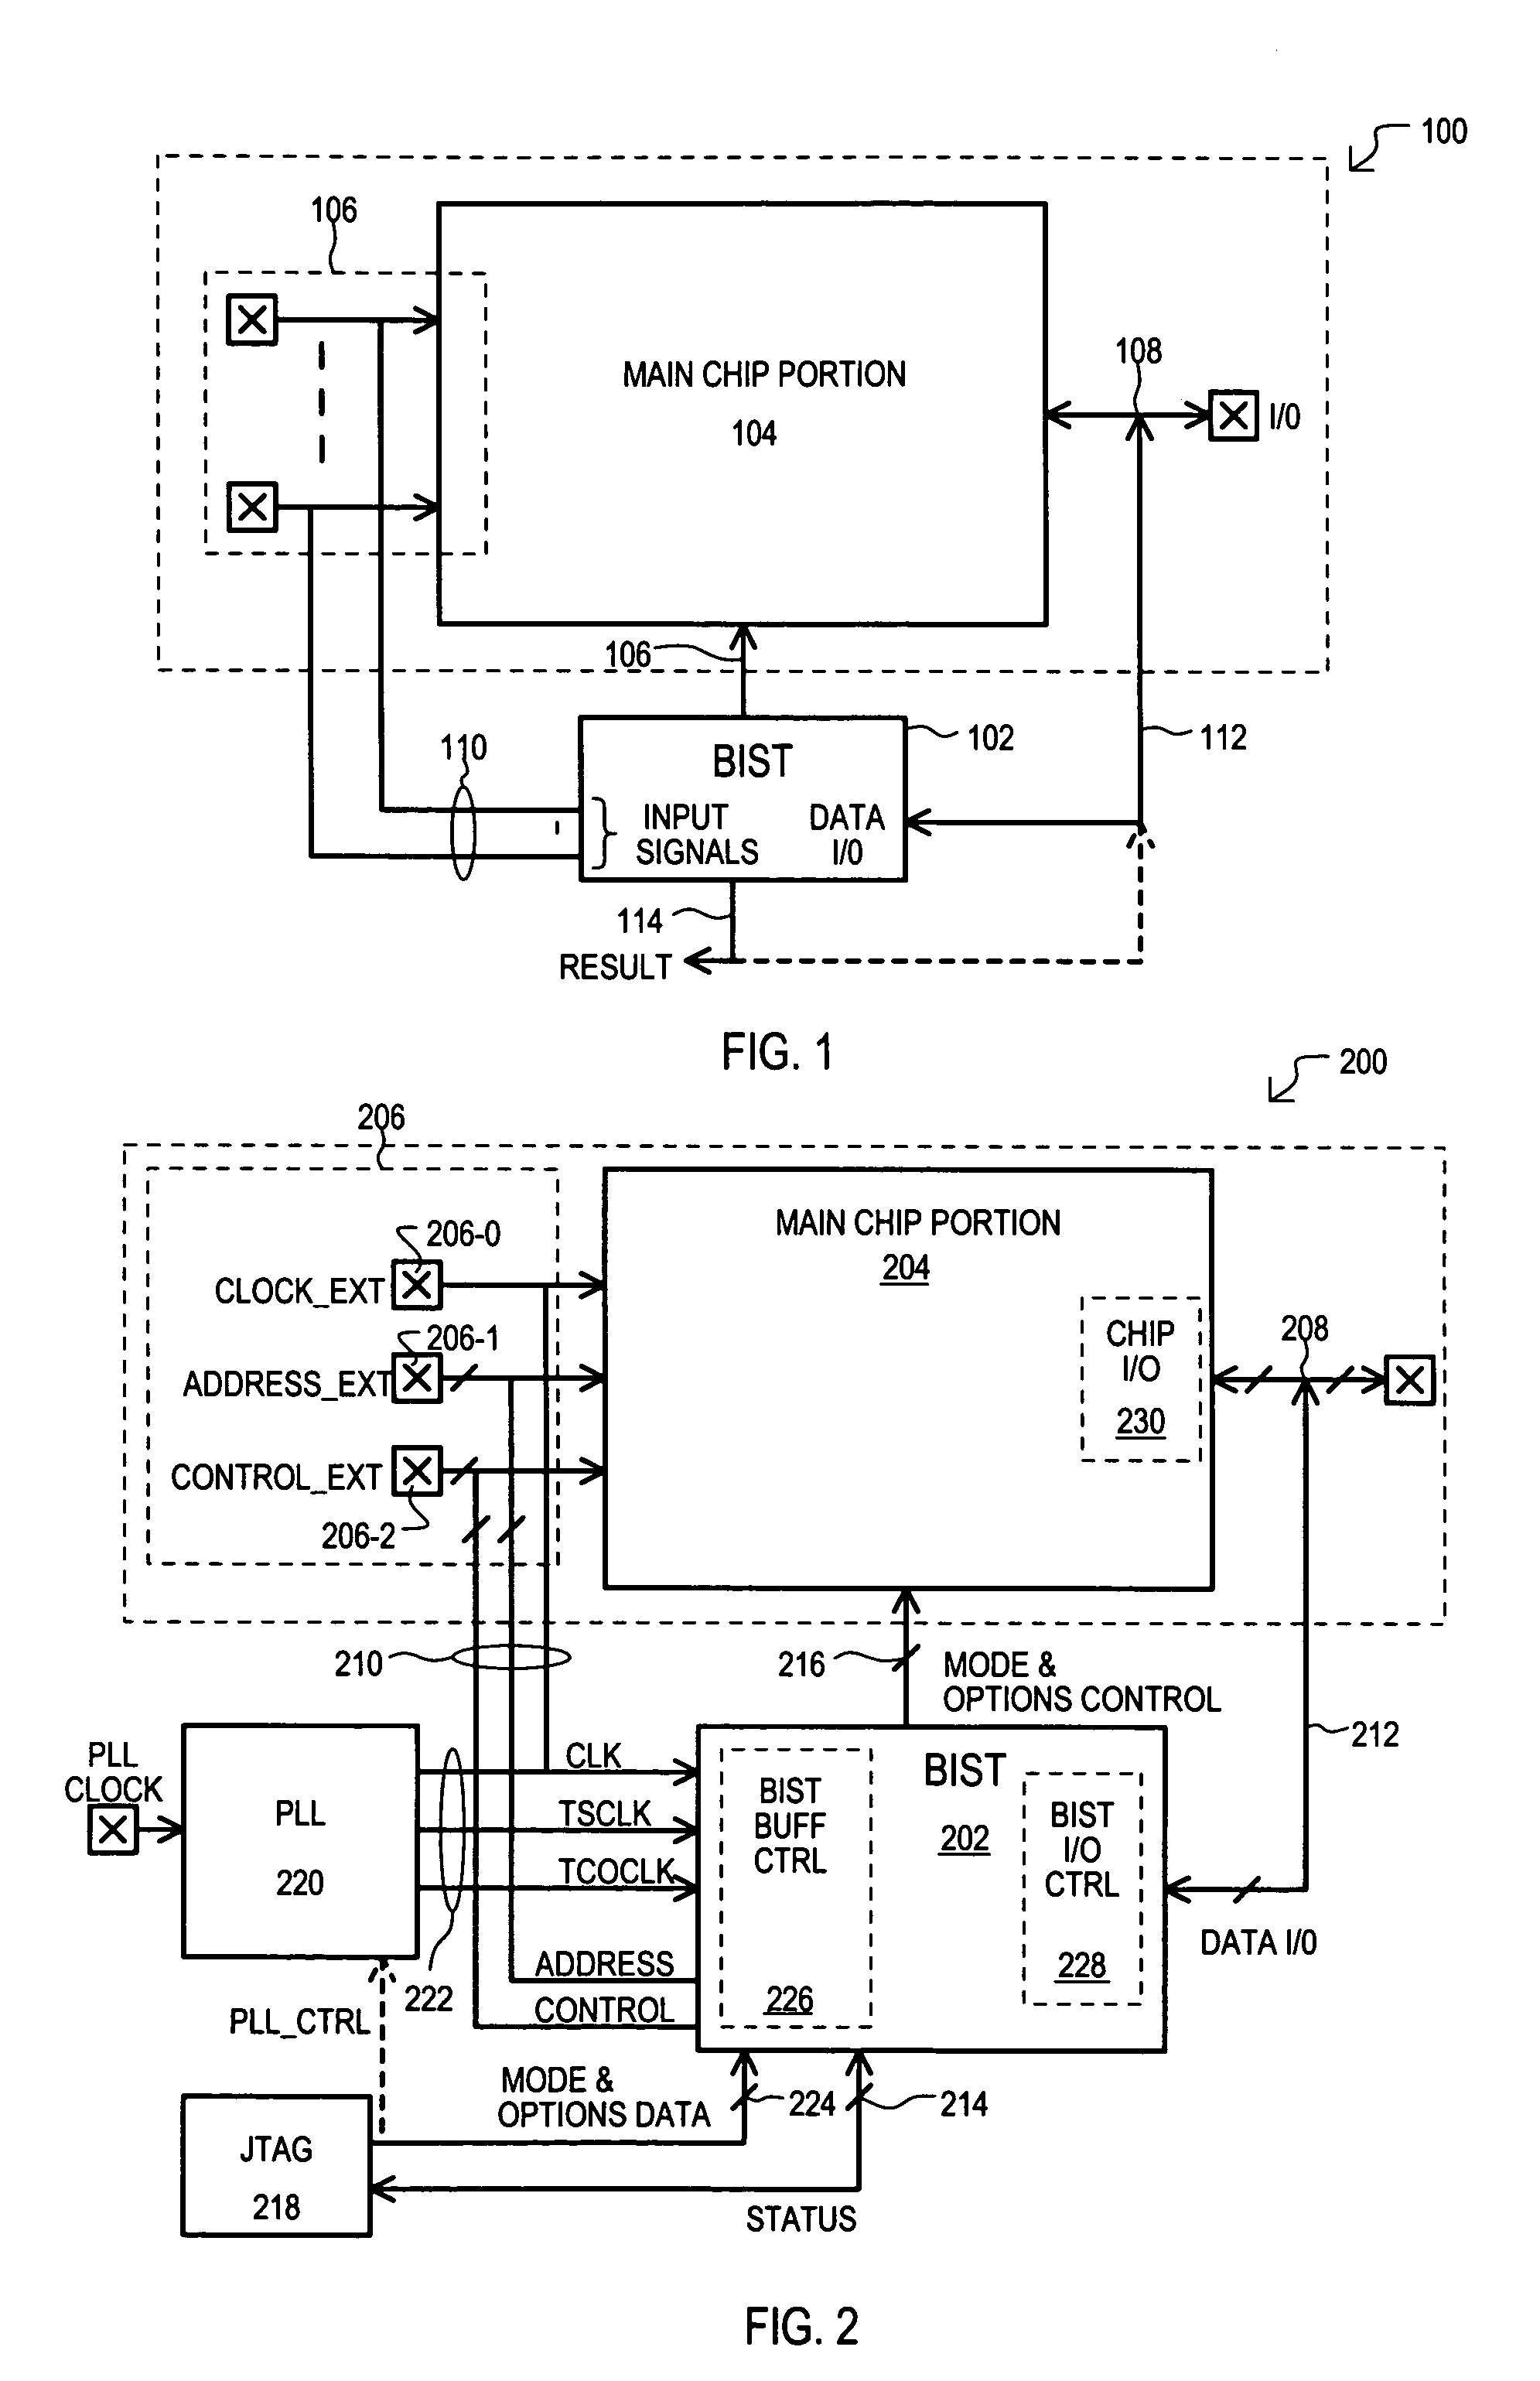 Method and apparatus for built-in self-test (BIST) of integrated circuit device